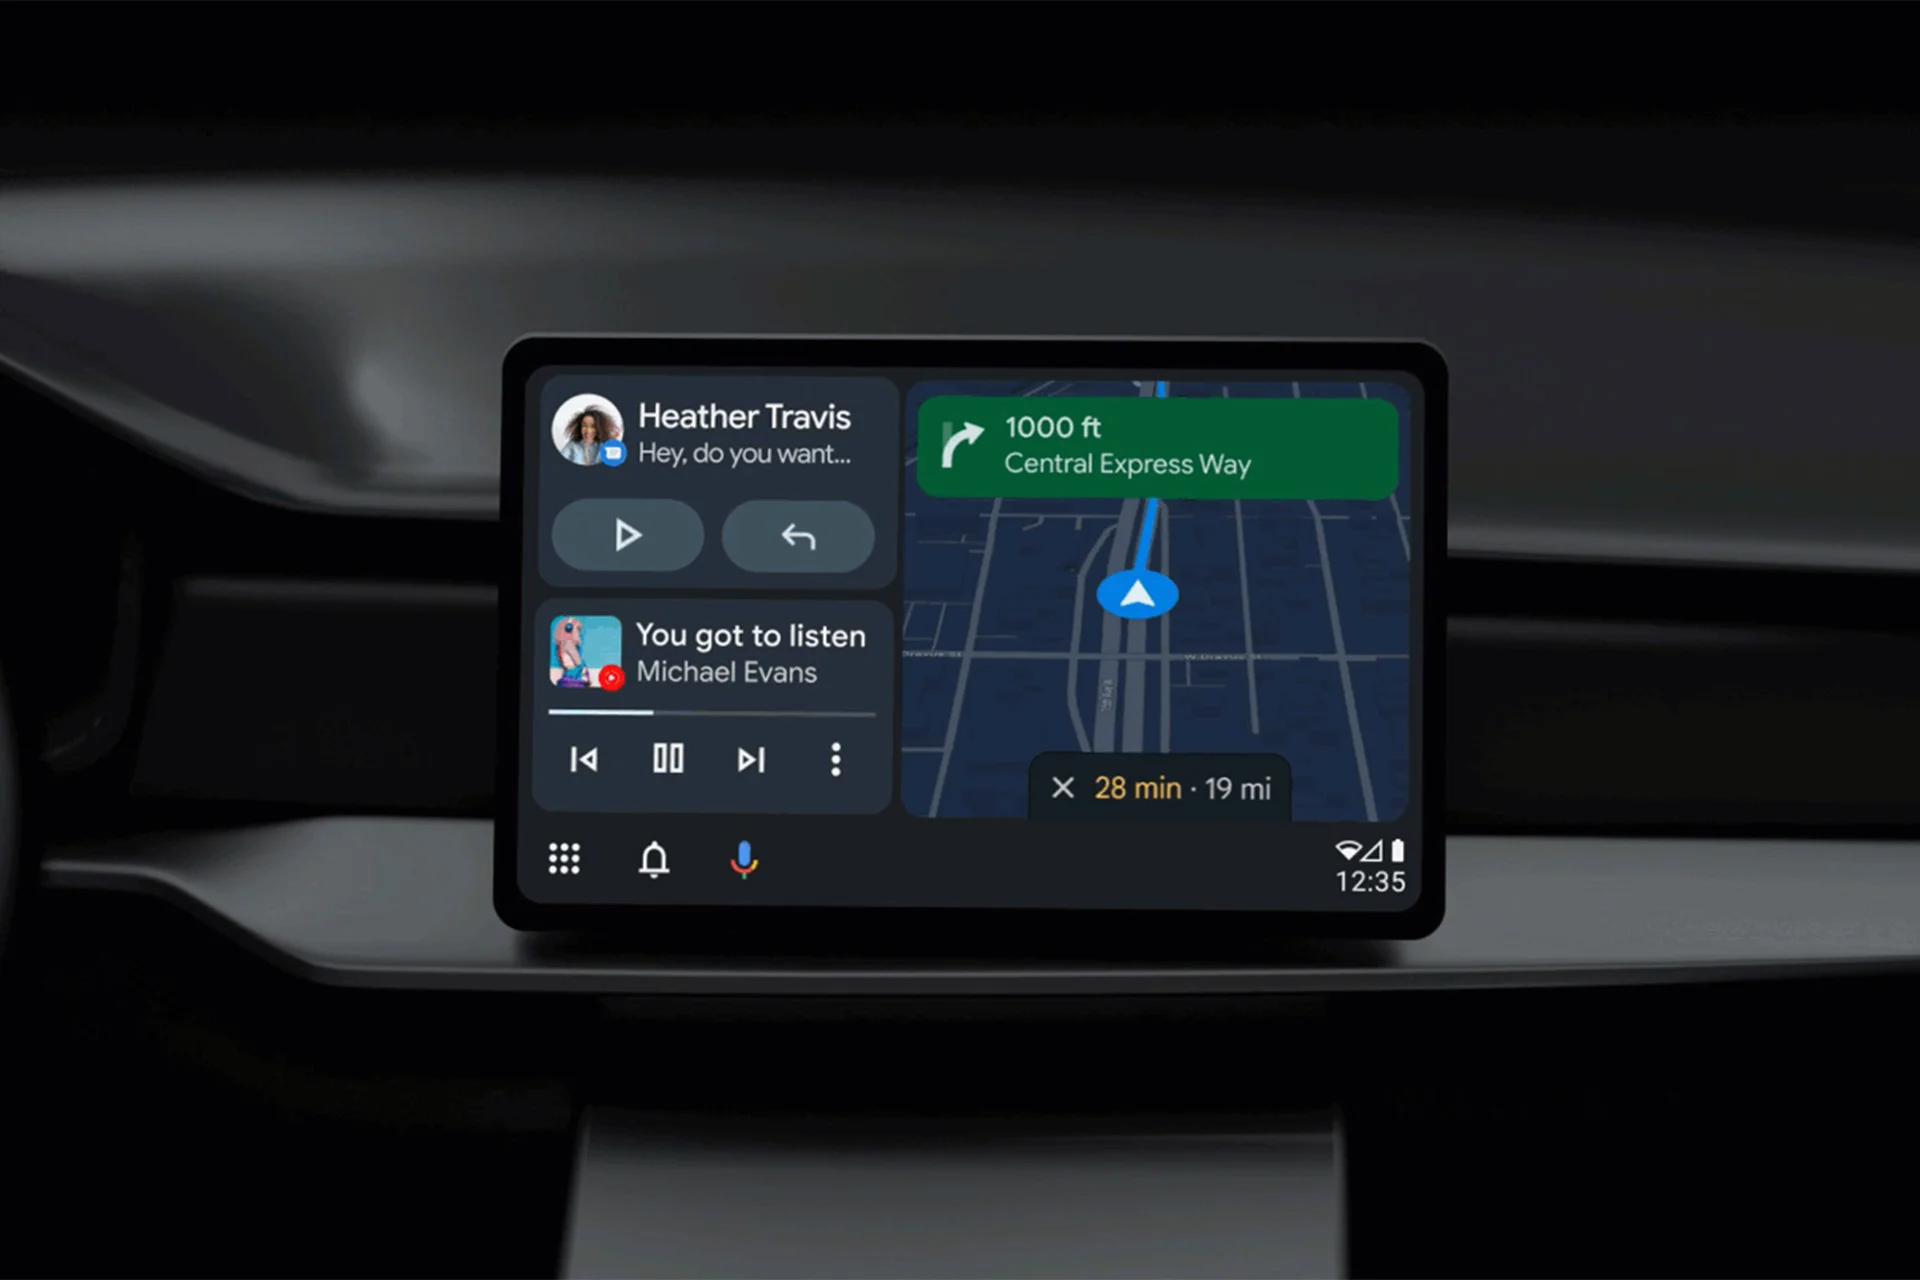 Android Auto stable update released